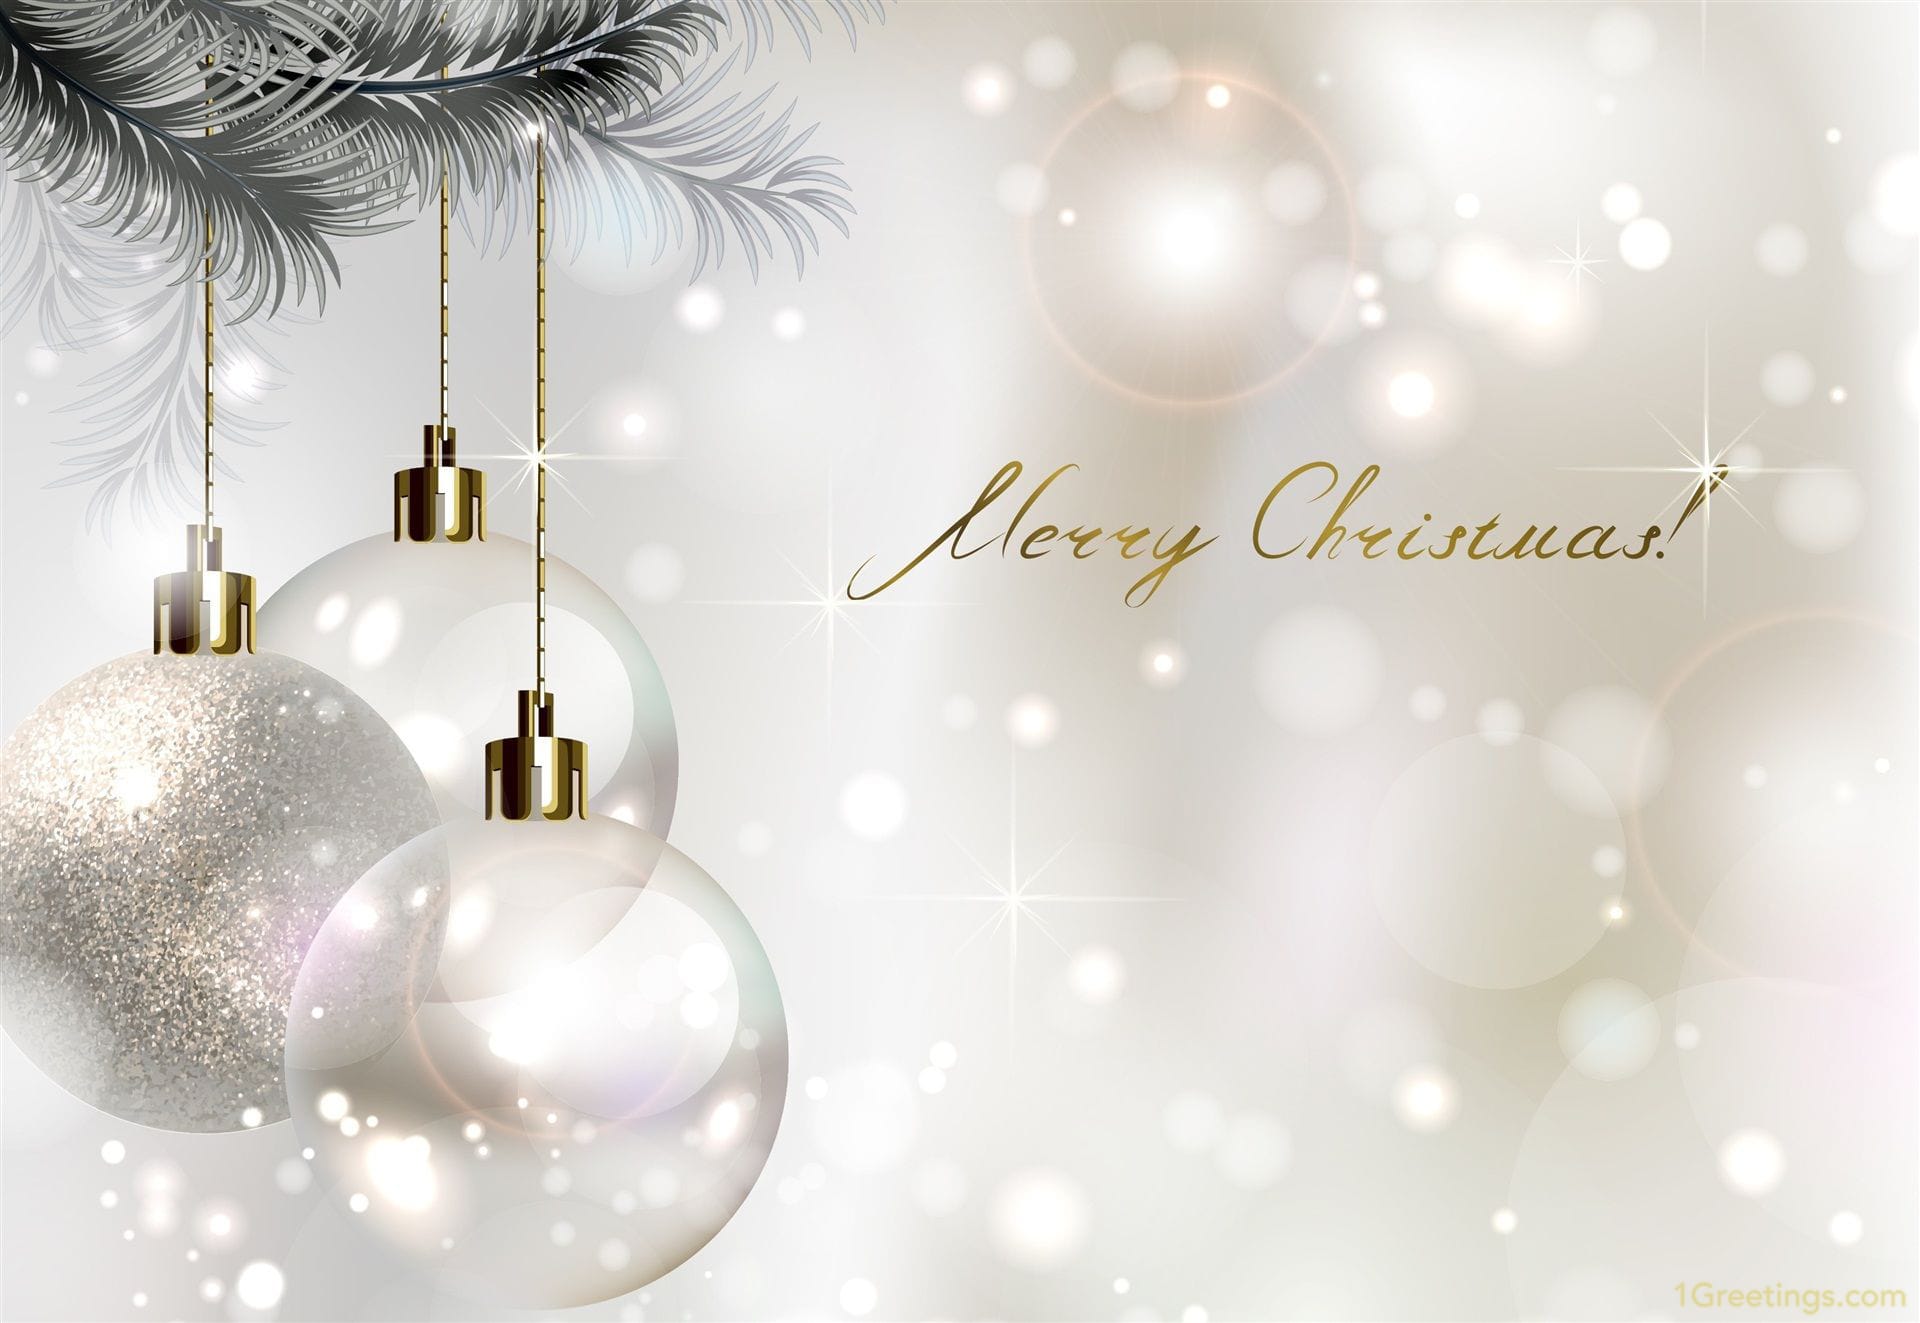 Merry Christmas Wallpaper Full HD Free Download - Images 3